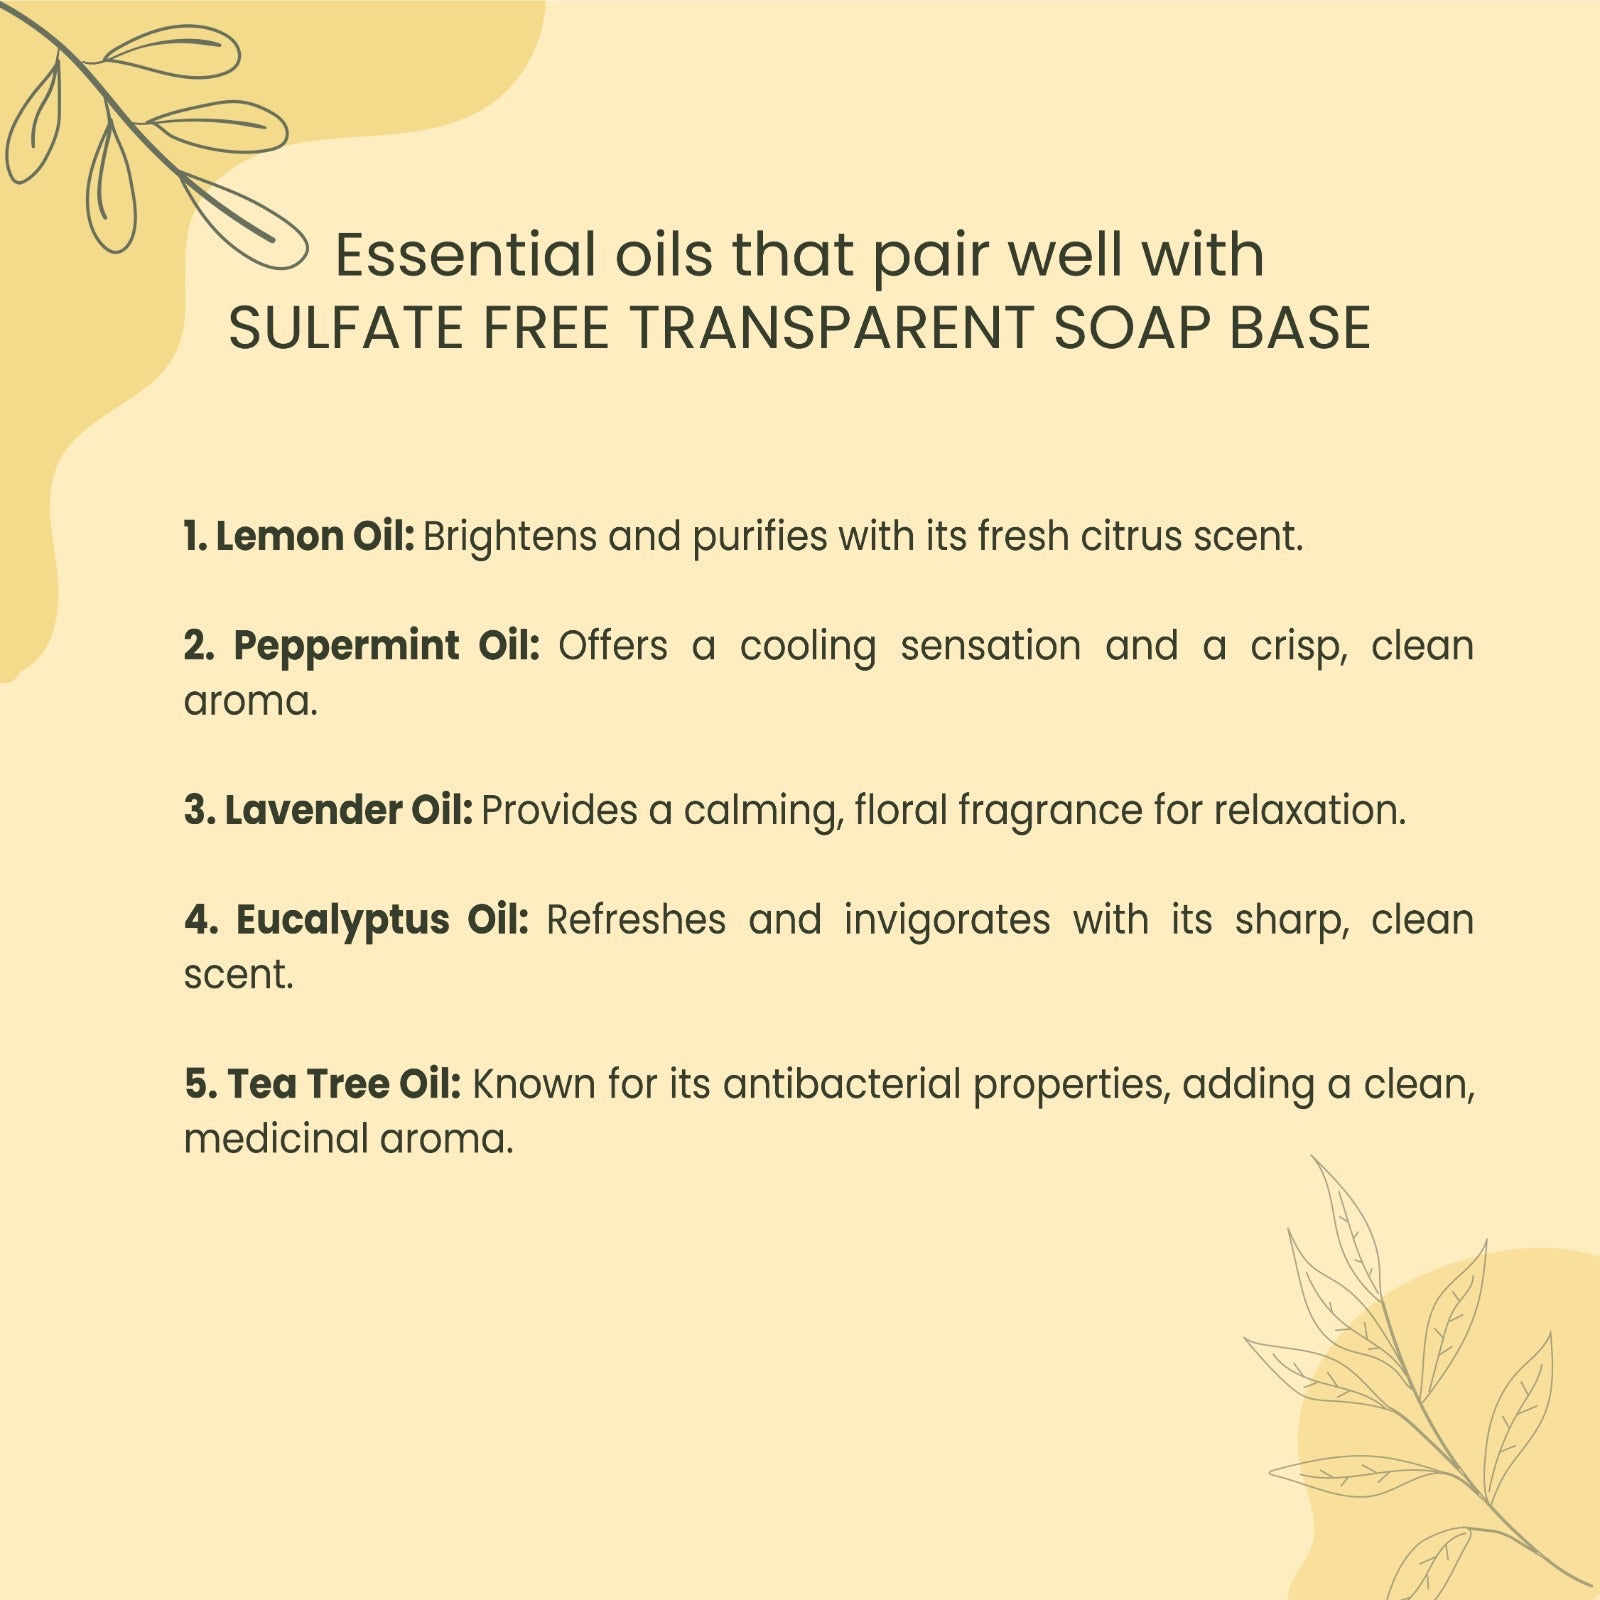 Sulfate Free Transparent Melt and Pour Soap Base